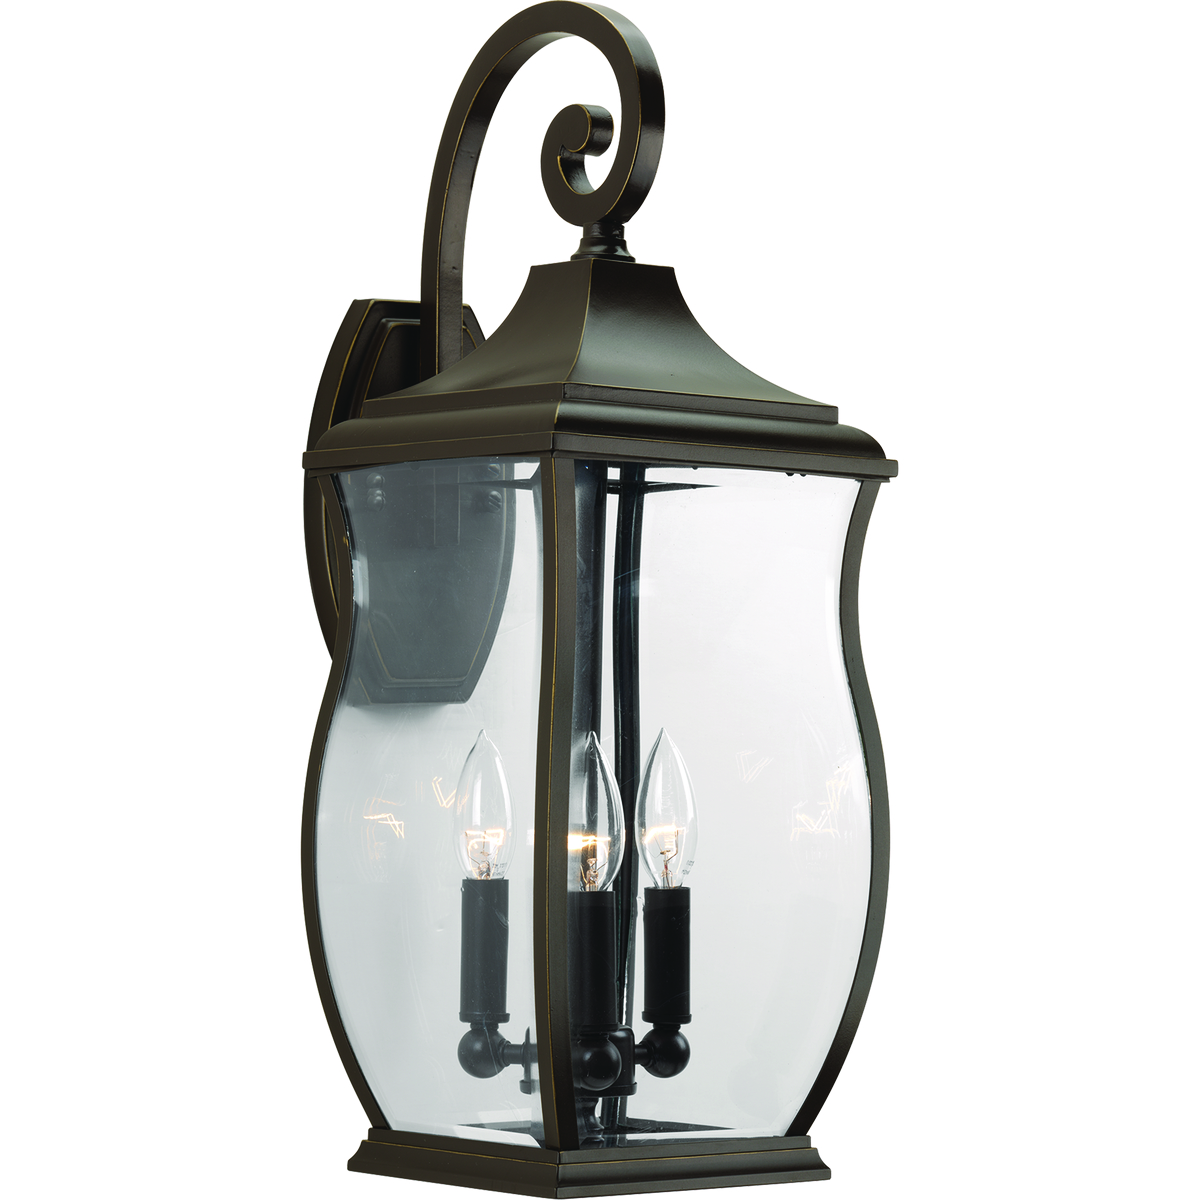 Enjoy the simple elegance of traditional styling in this three-light wall lantern. Township's clear beveled glass and Oil Rubbed Bronze finish contains notes of New England-inspired style for this new outdoor lantern collection.